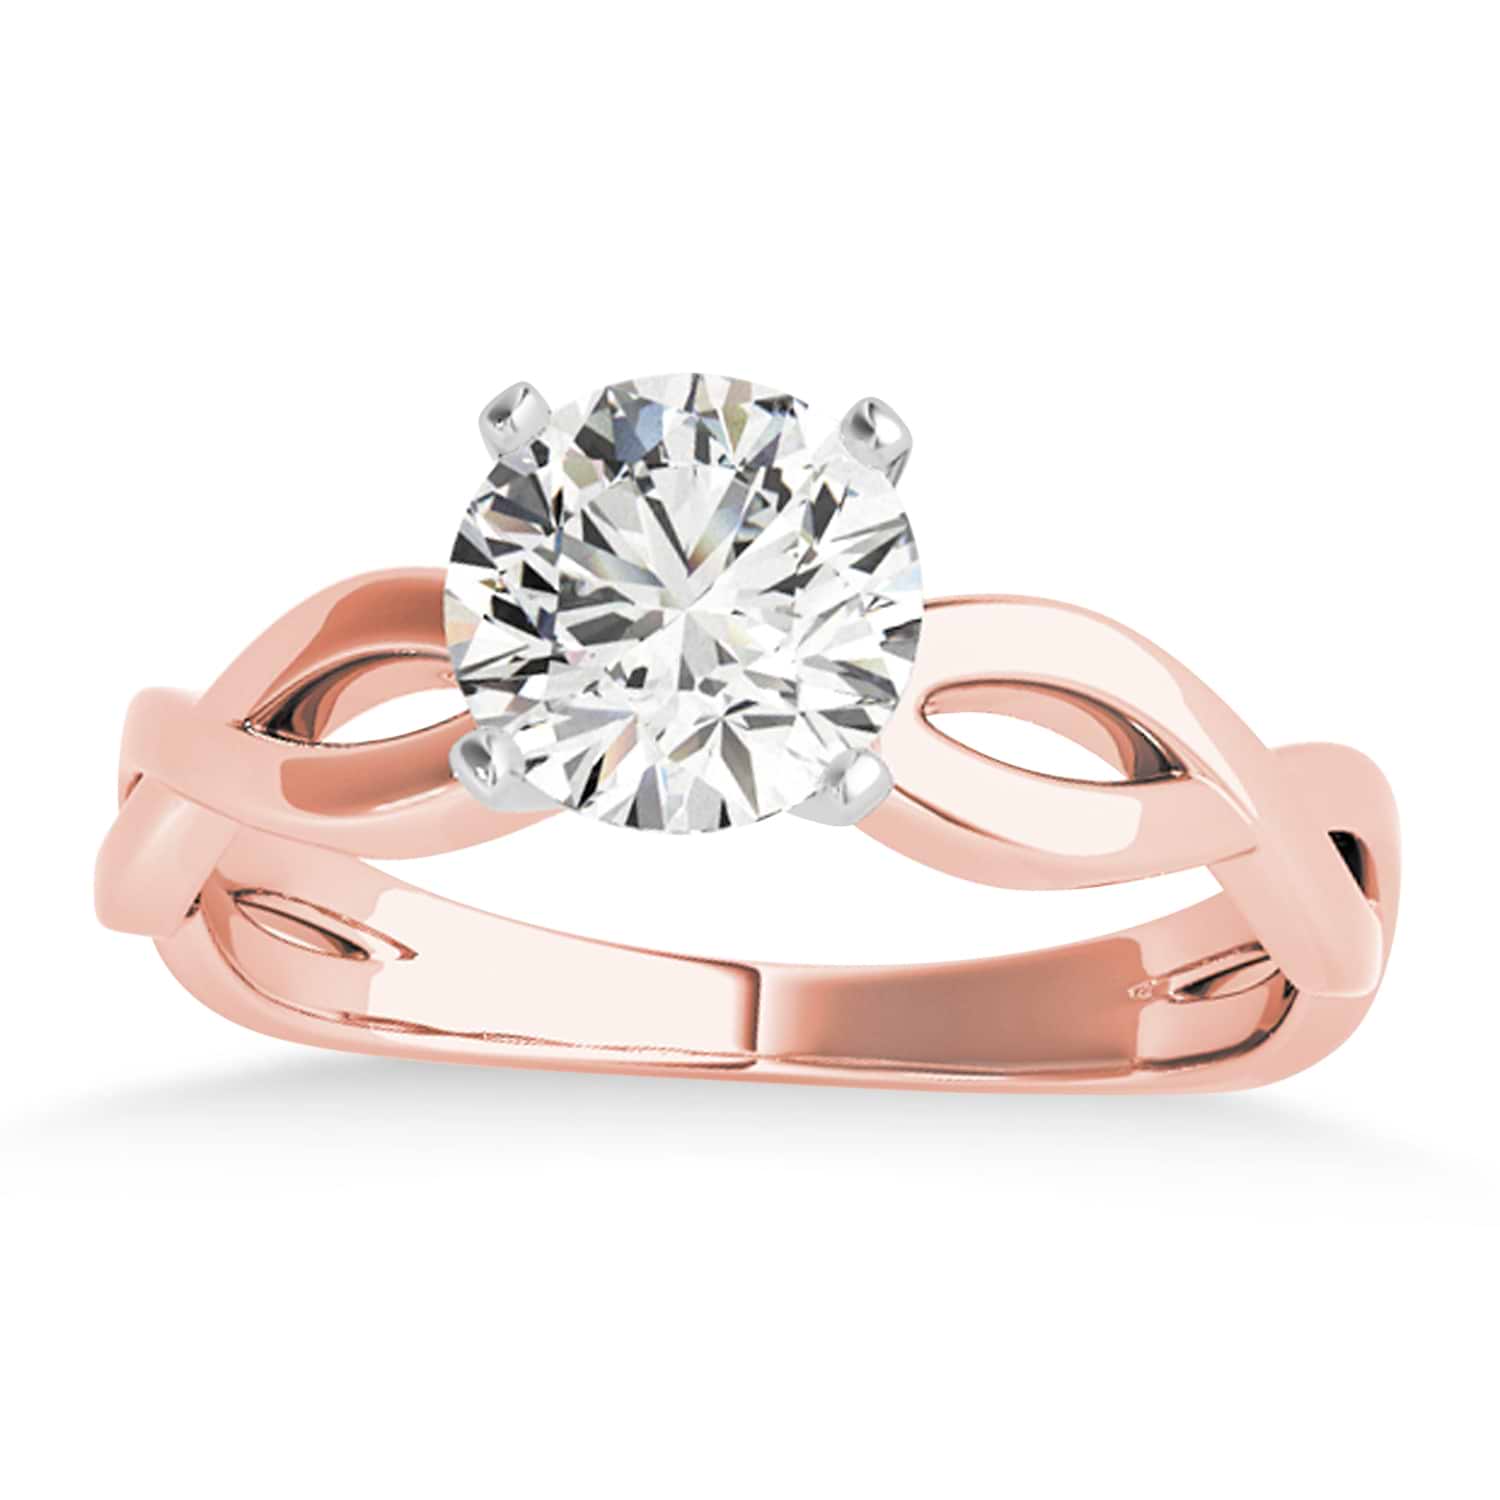 Diamond Twisted Shank Engagement Ring in 14k Rose Gold